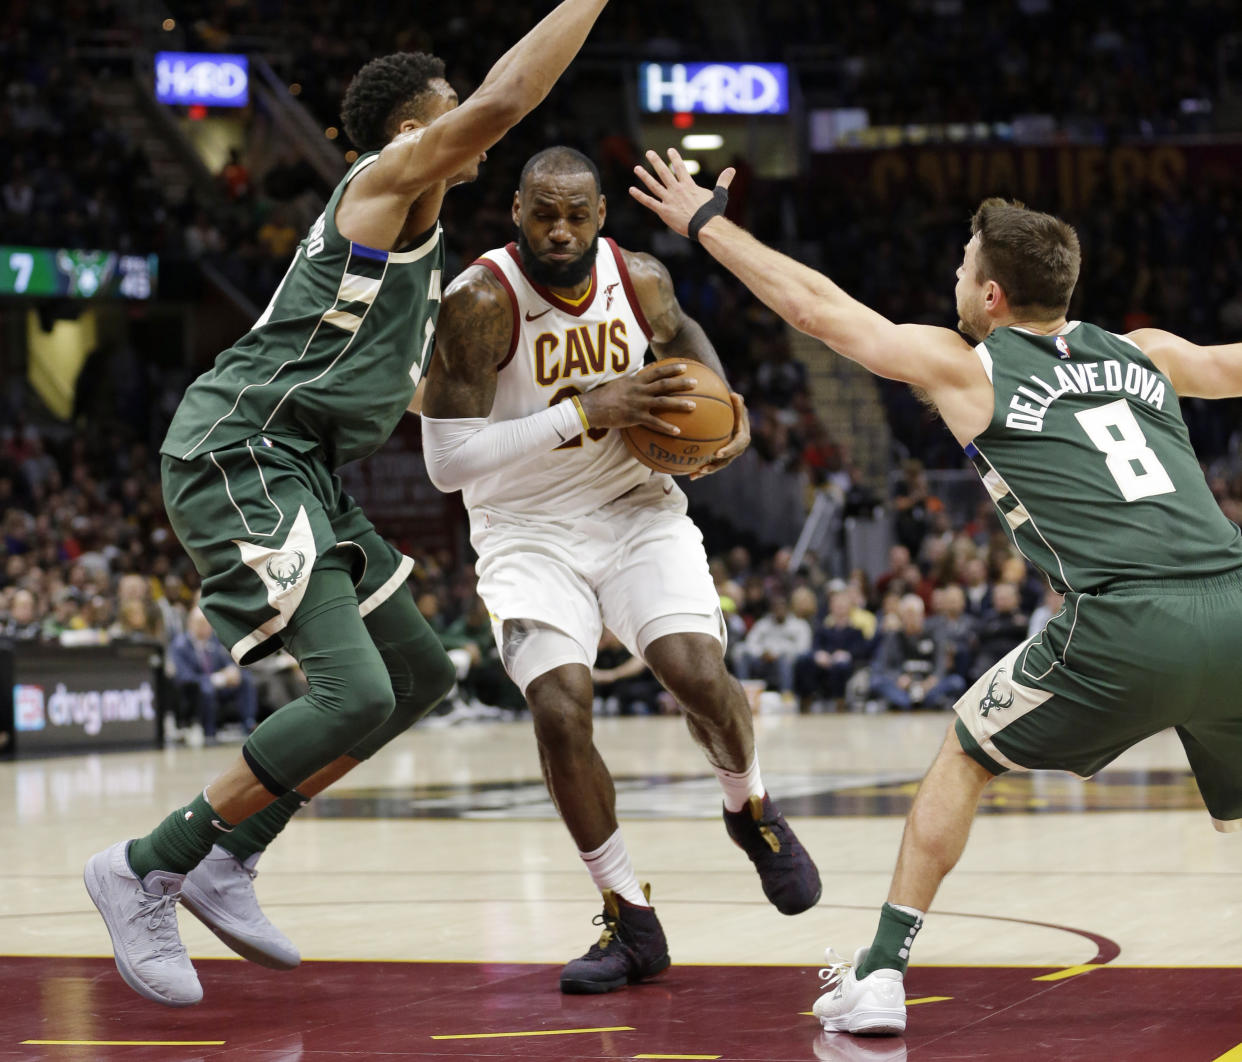 LeBron James drives through Giannis Antetokounmpo (and, to a lesser extent, Matthew Dellavedova) on his way to the cup. (AP)